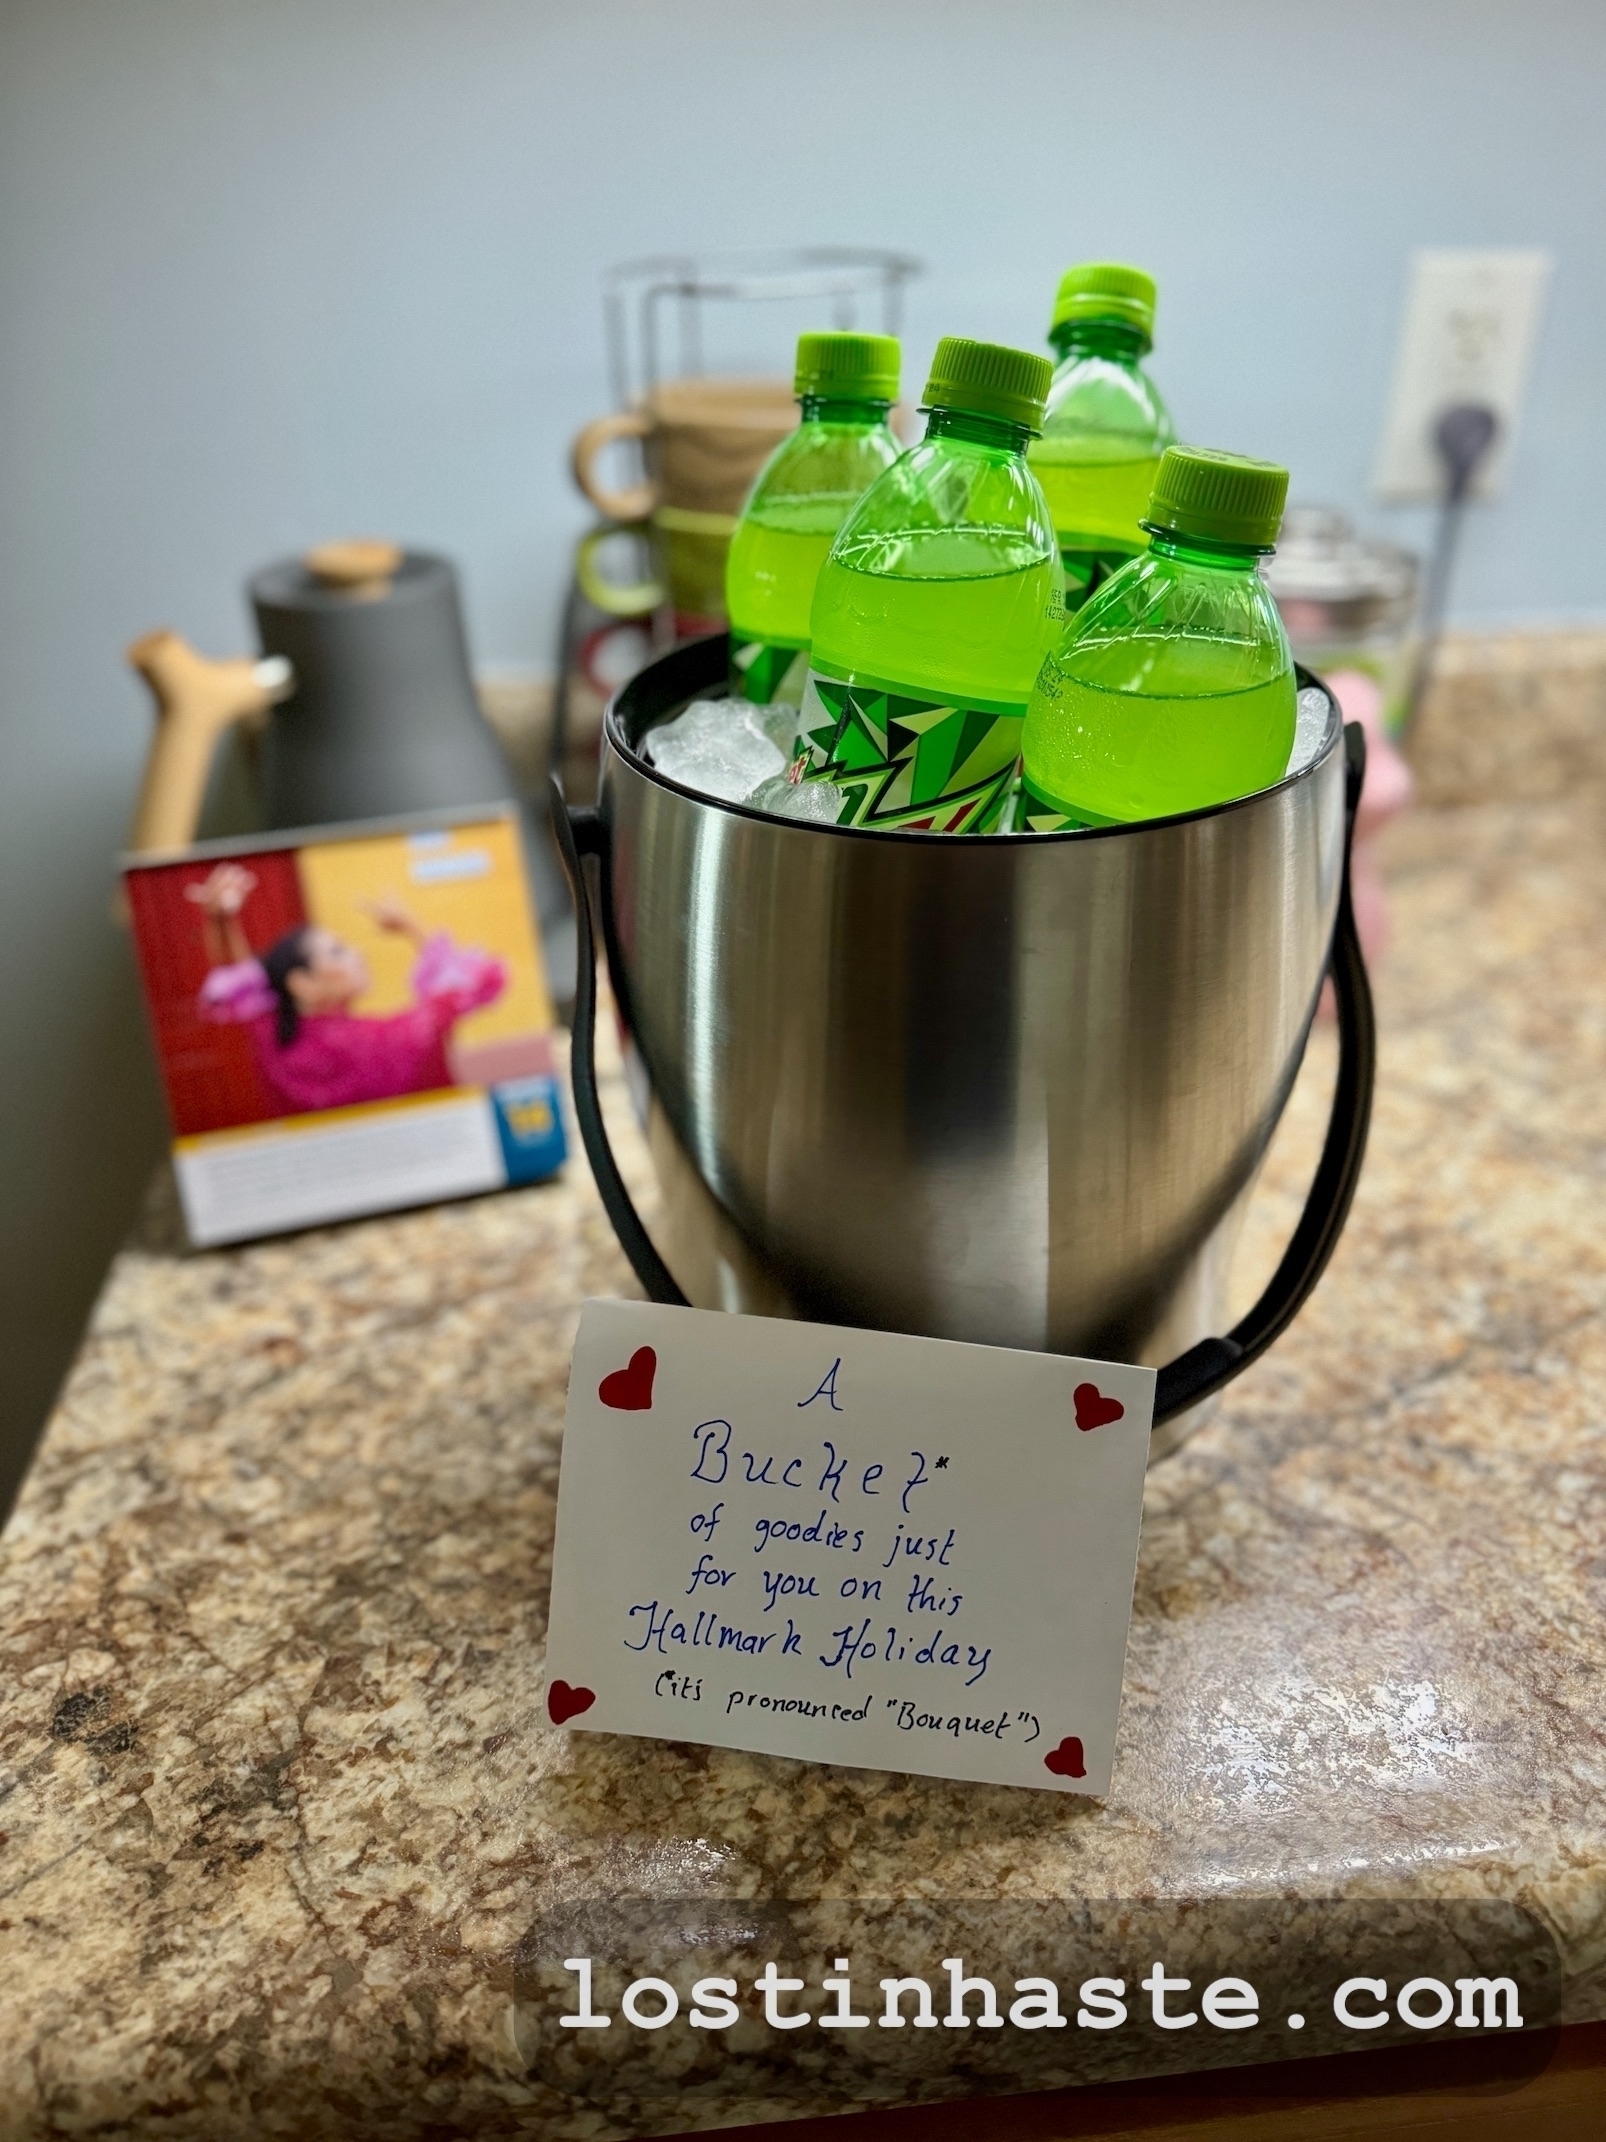 A metal bucket filled with ice and green bottled beverages on a countertop with a note, with heart stickers, reading: A Bucket* of goodies just for you on this Hallmark Holiday (*its pronounced 'Bouquet')